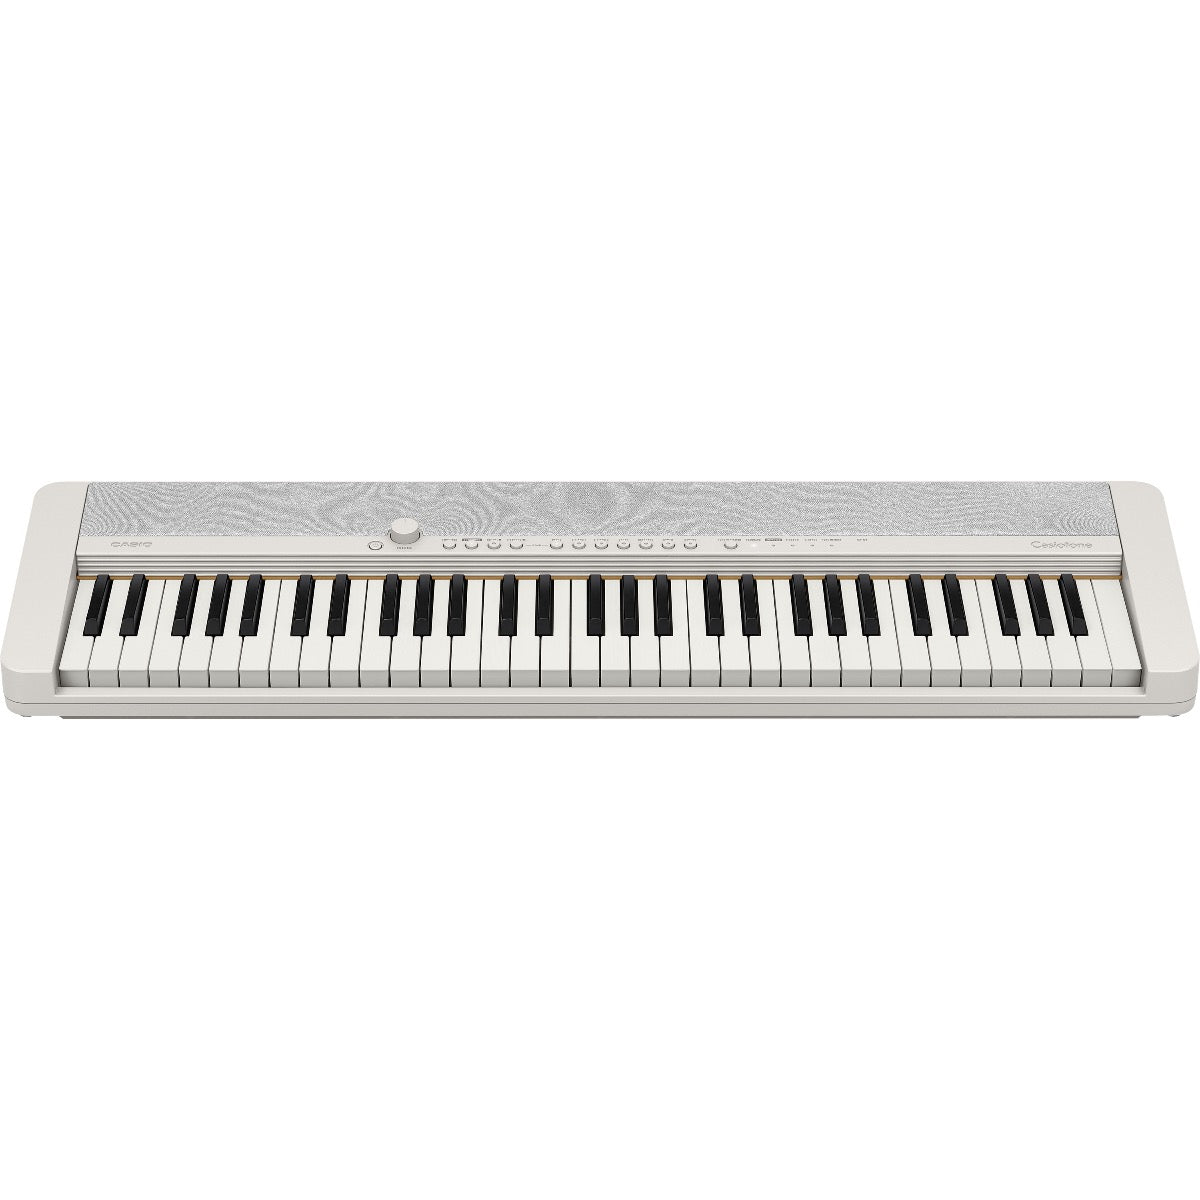 Perspective view of Casio Casiotone CT-S1 Portable Keyboard - White showing top and front